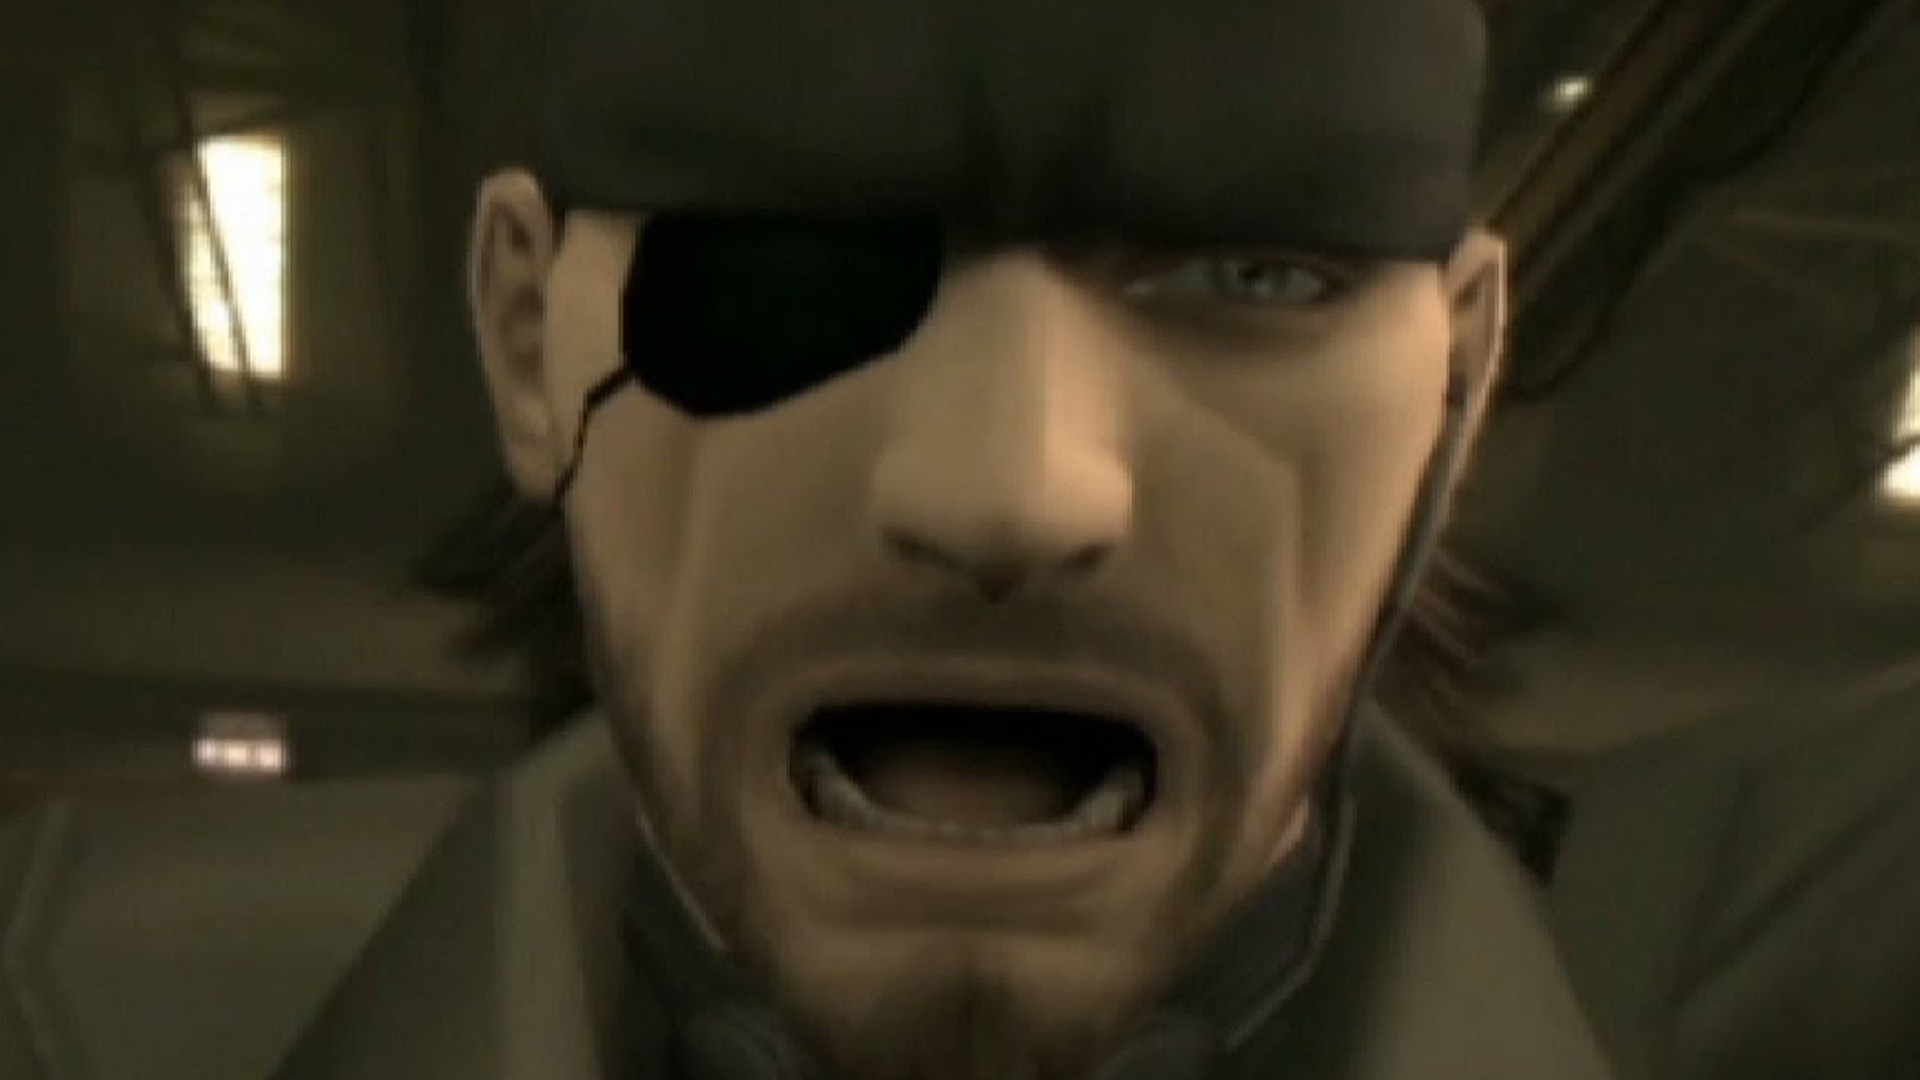 Steam says no keyboard support for Metal Gear Solid